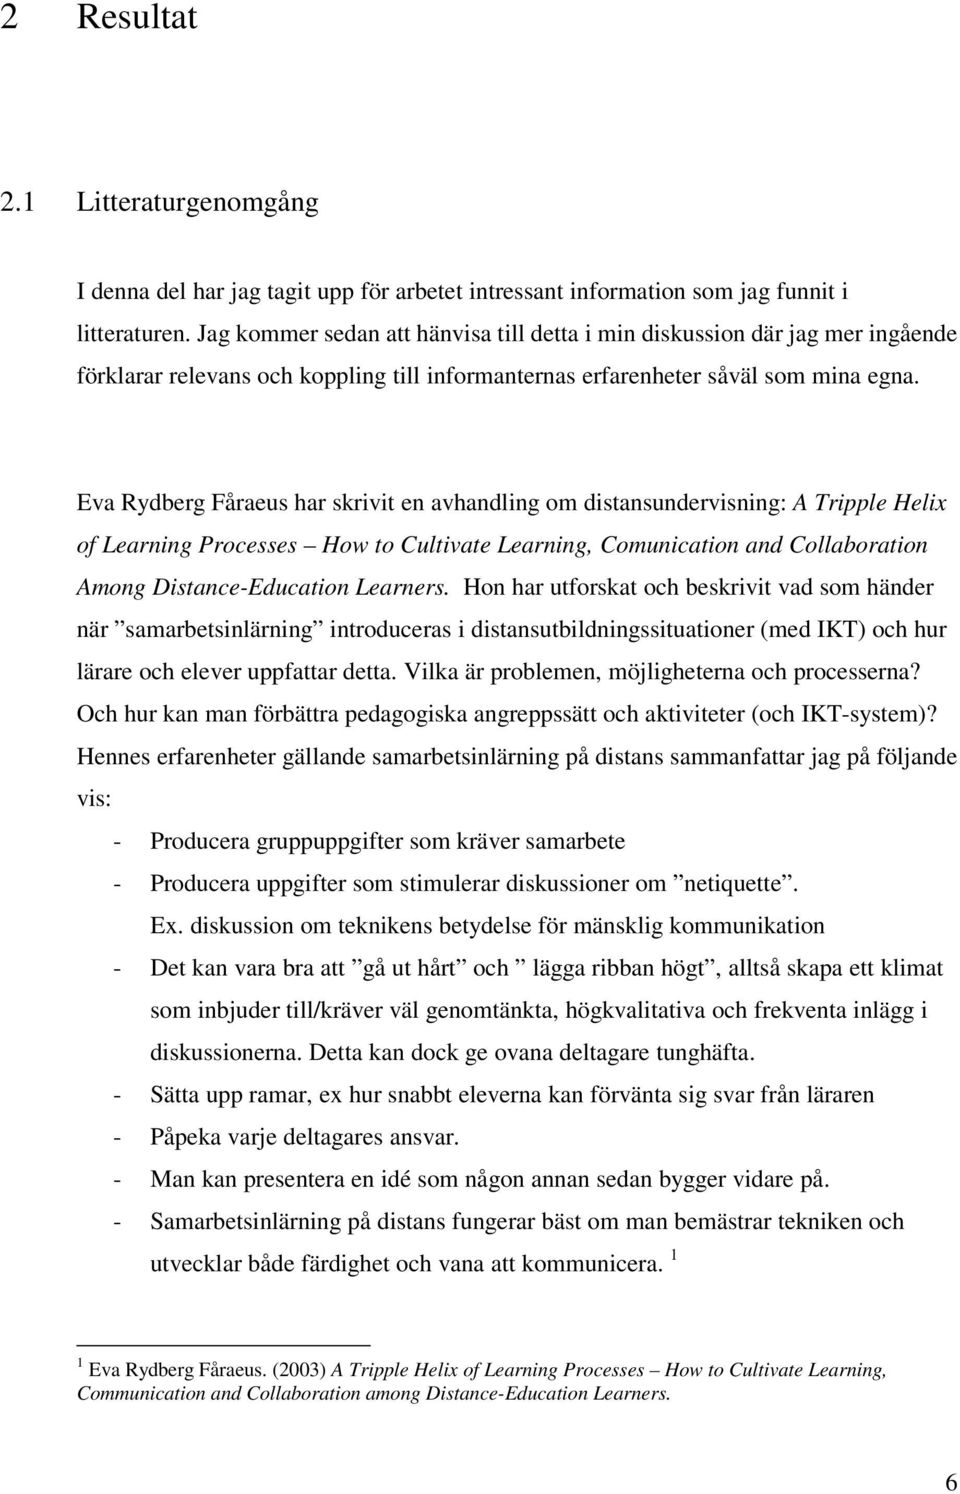 Eva Rydberg Fåraeus har skrivit en avhandling om distansundervisning: A Tripple Helix of Learning Processes How to Cultivate Learning, Comunication and Collaboration Among Distance-Education Learners.